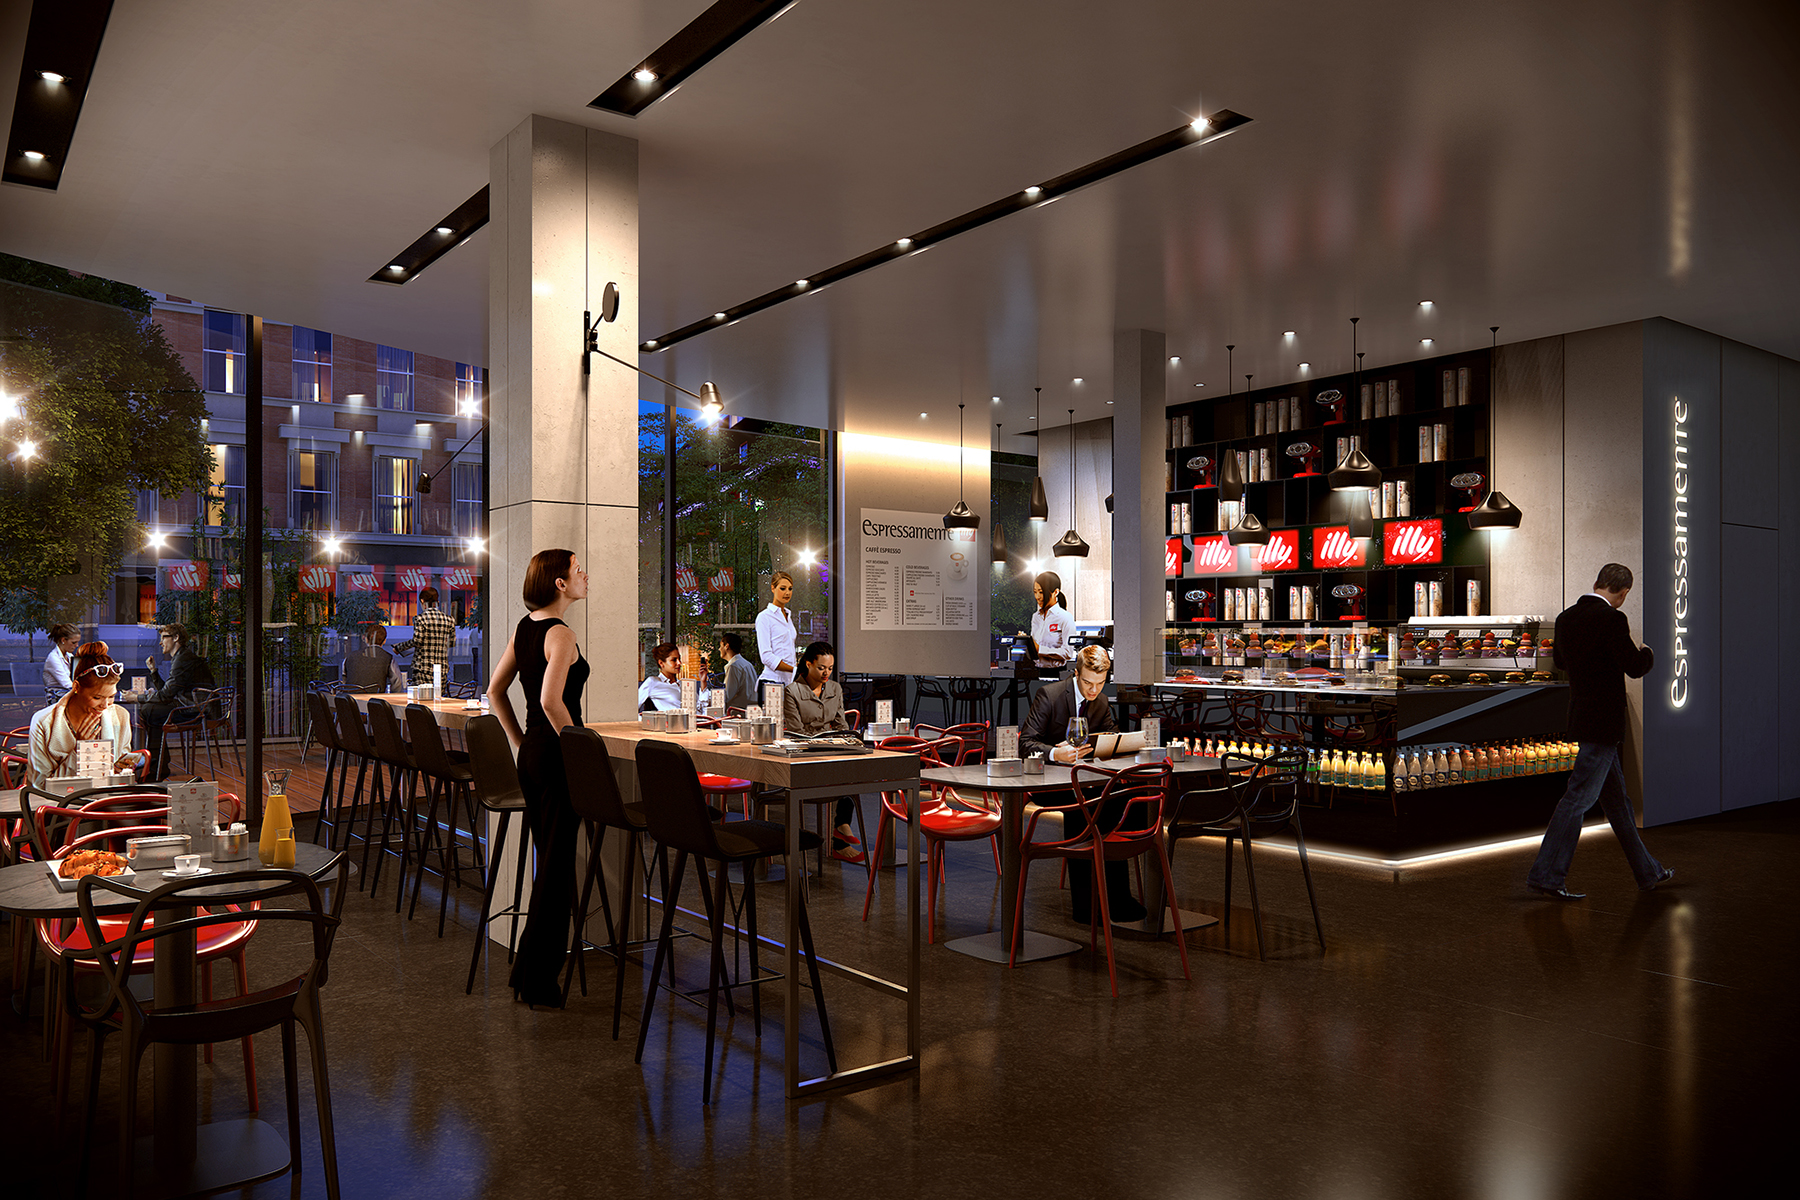 Park Plaza Hotels Waterloo - Illy Cafe